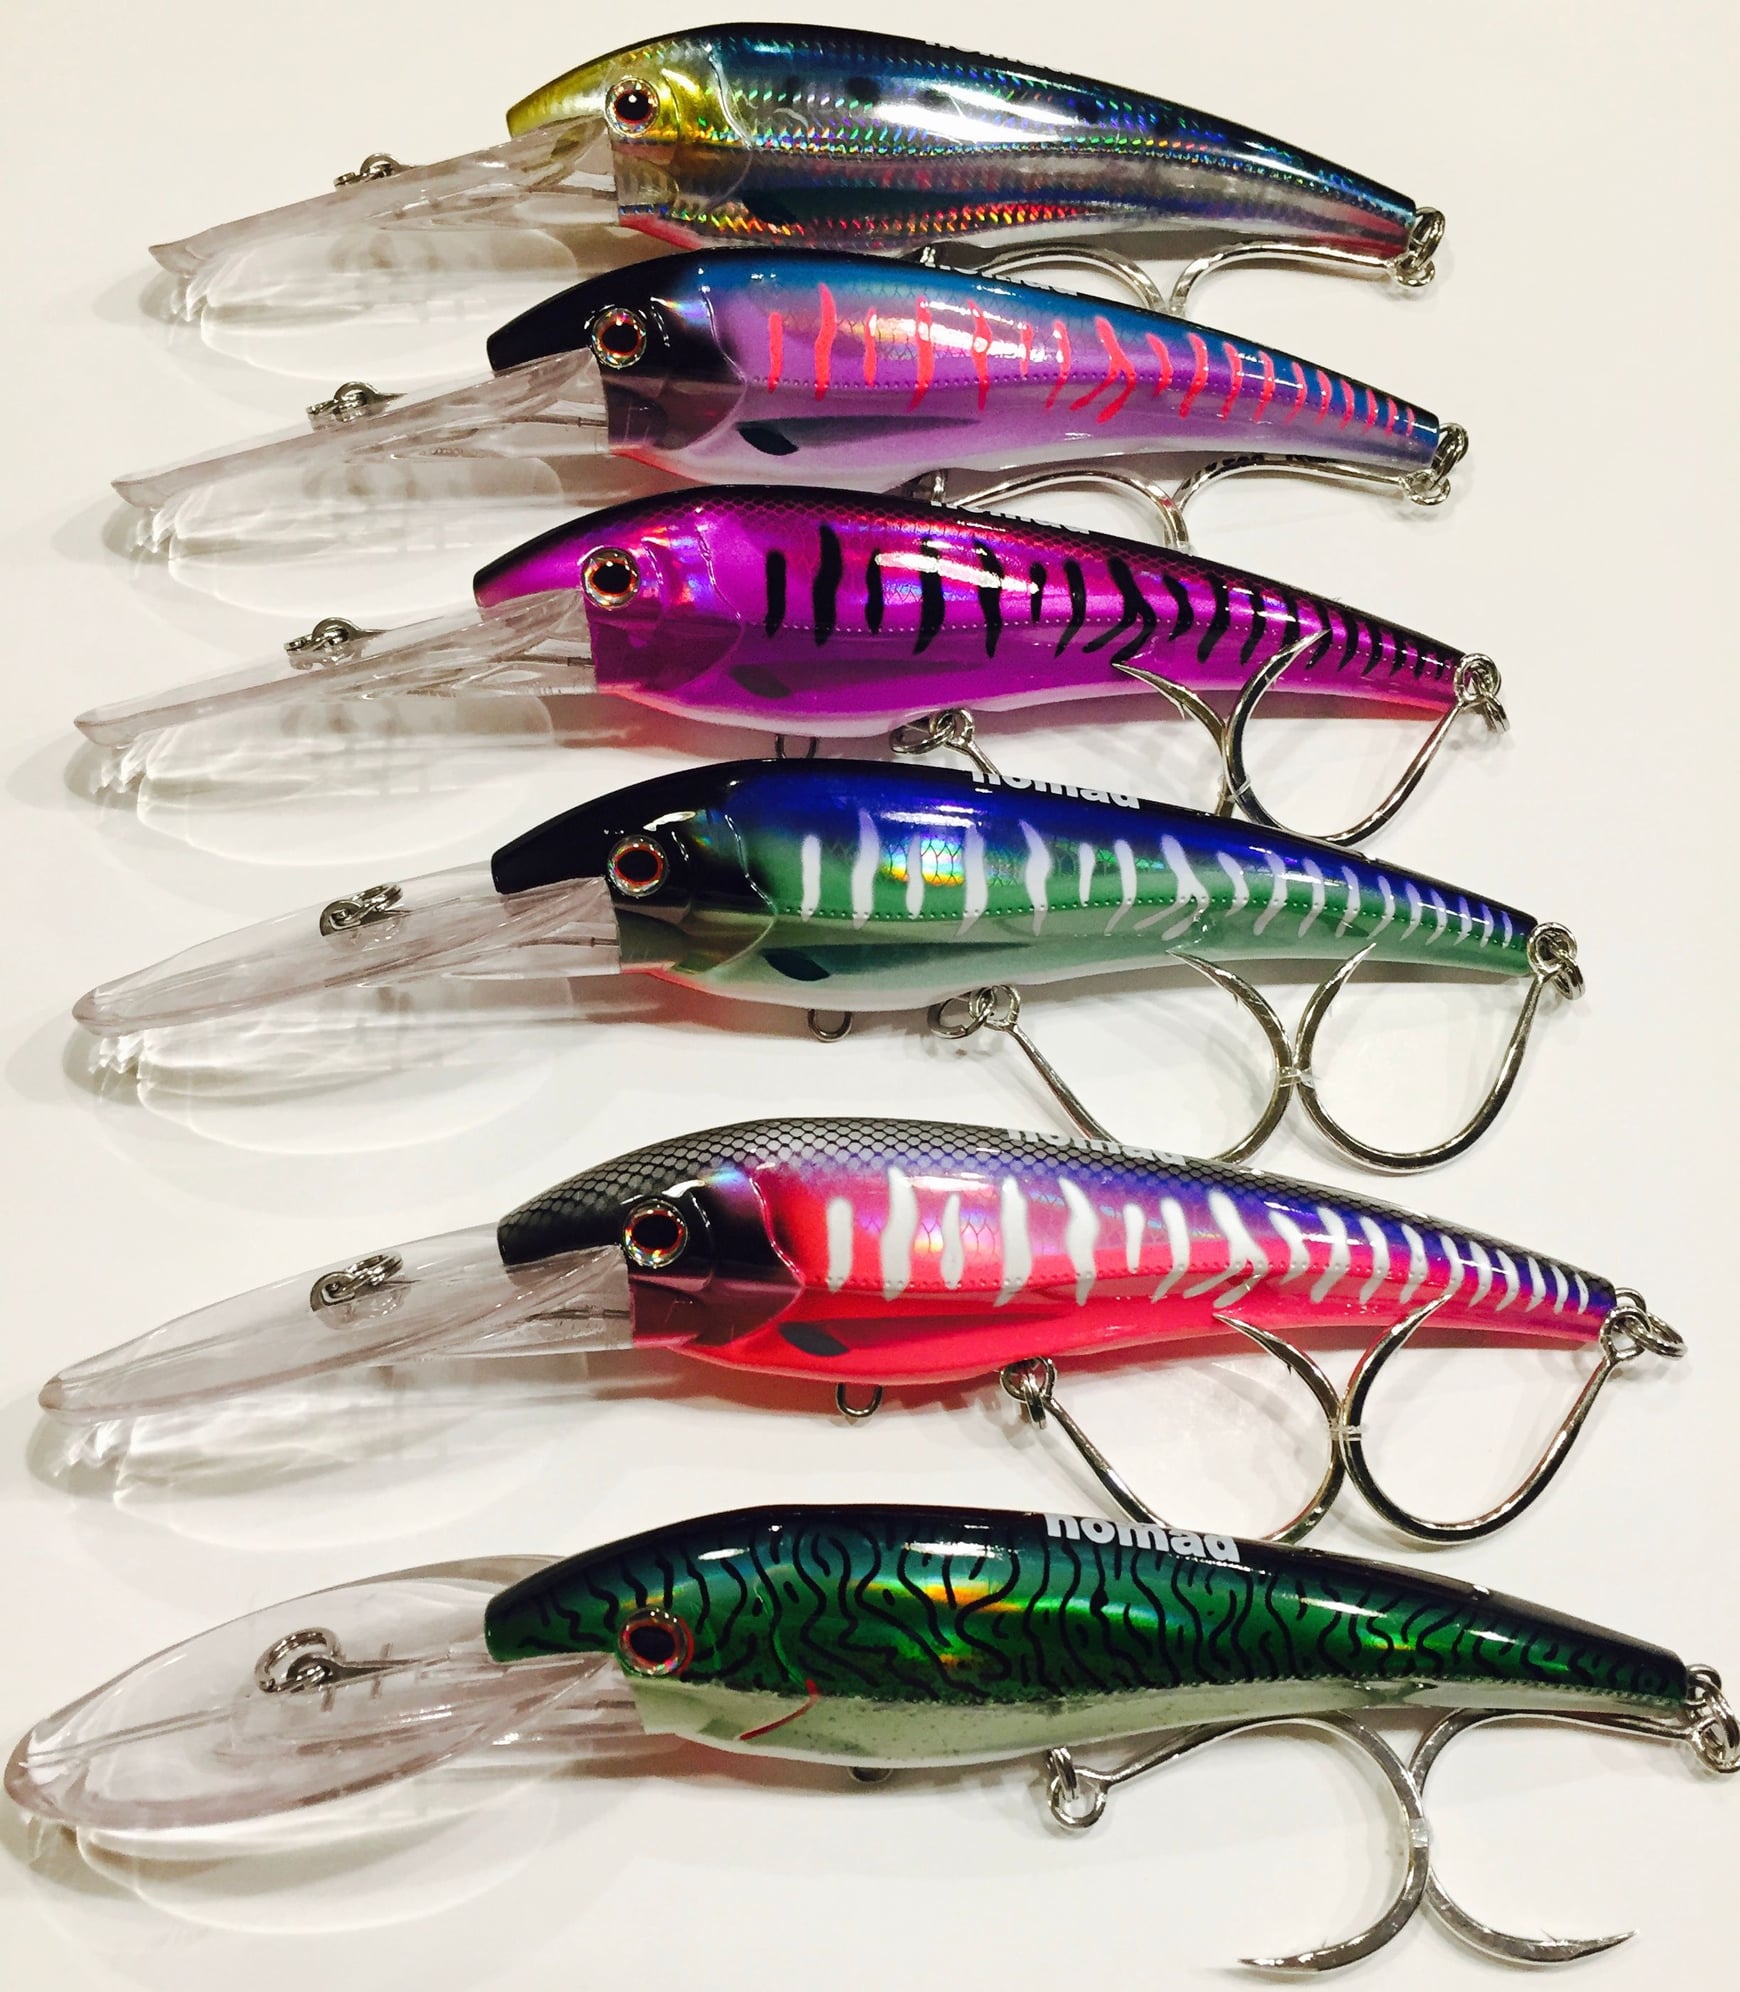 DTX Minnow in the NEW Redbait colour - Tuna candy✔️ Available in